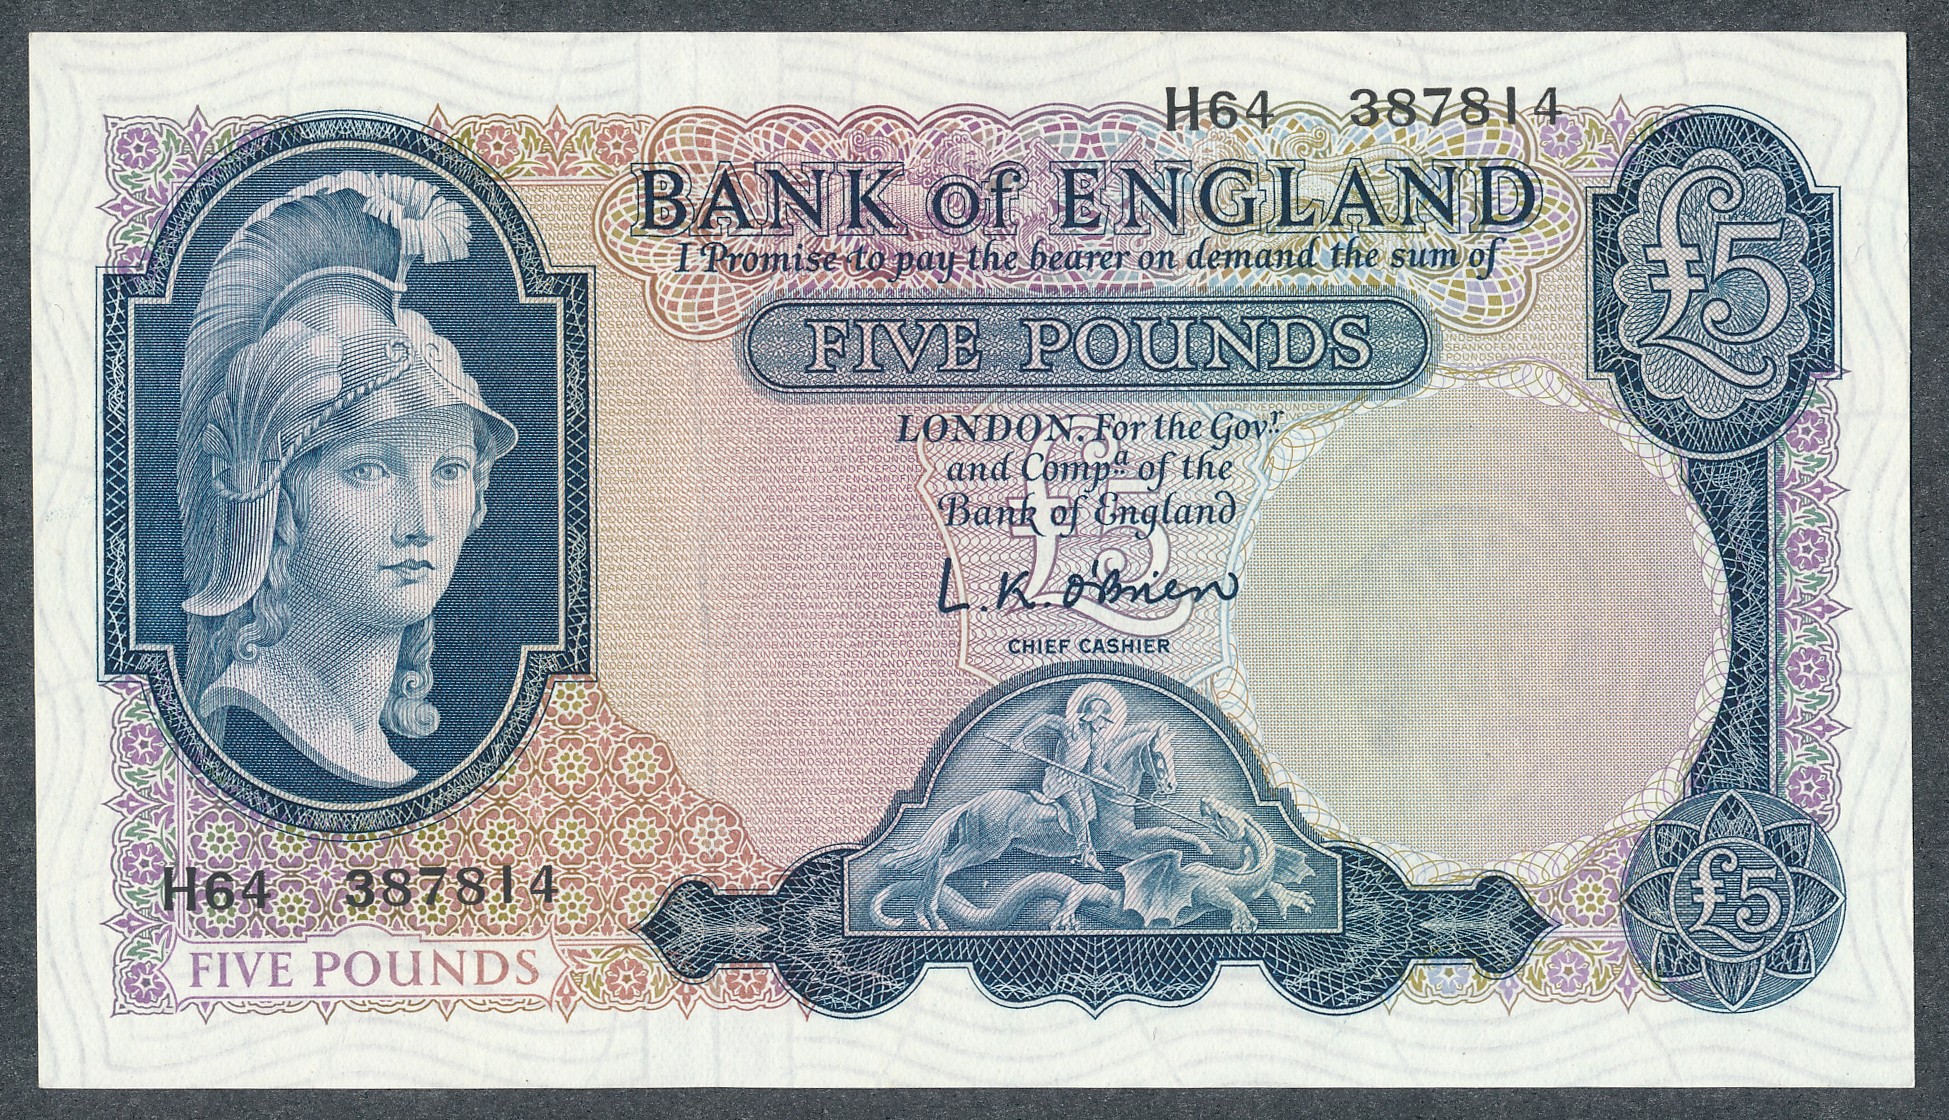 O'Brien £5 1961 (12 July) H64 387814 first series, uncirculated.